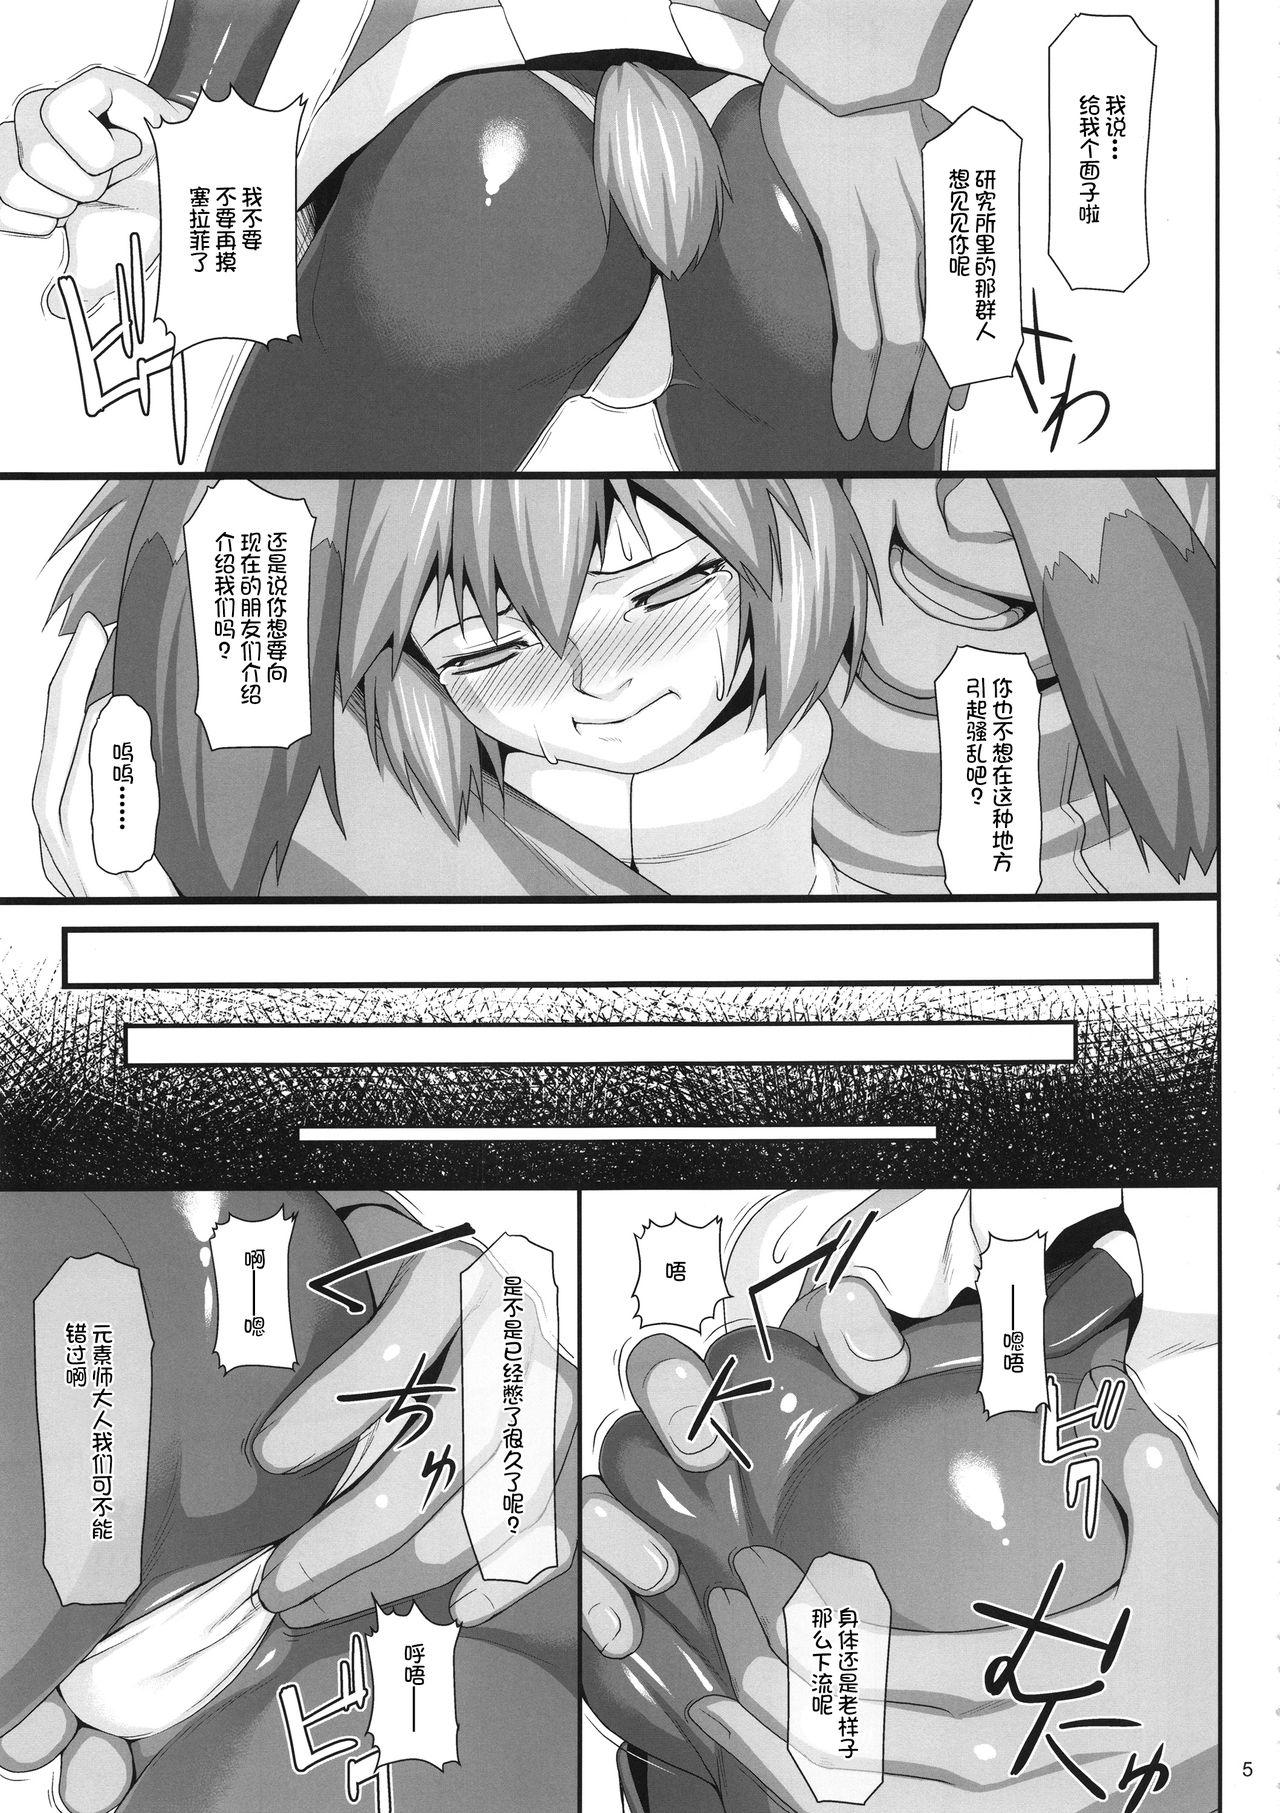 From Seraphic Gate 4 - Xenogears Spank - Page 5